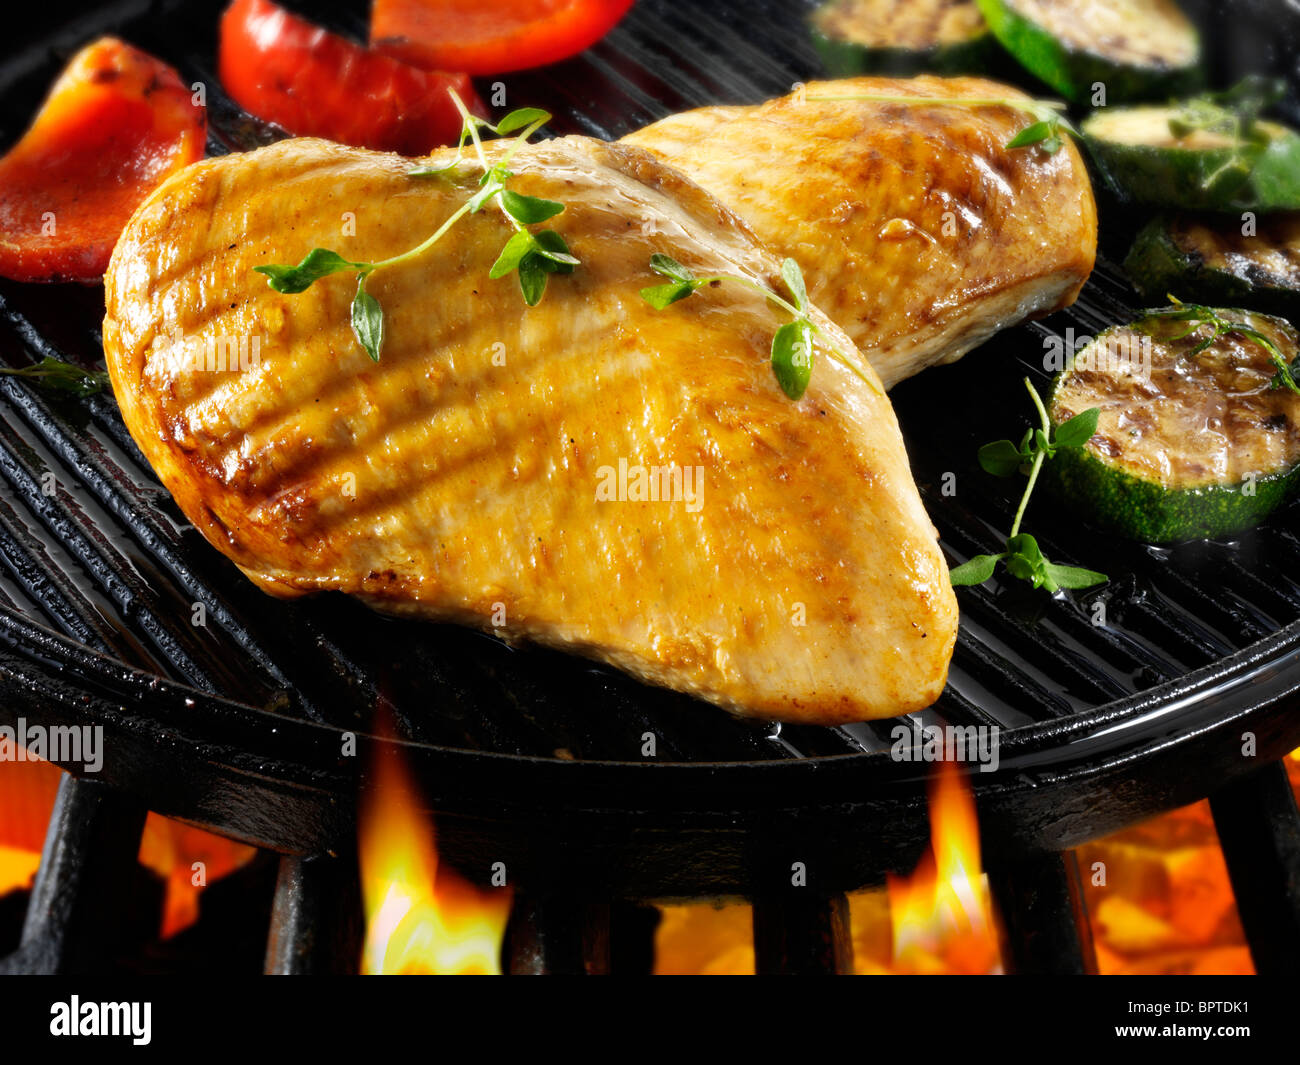 Chicken fillets cooking on a bbq. Food photos, pictures & images. Stock Photo